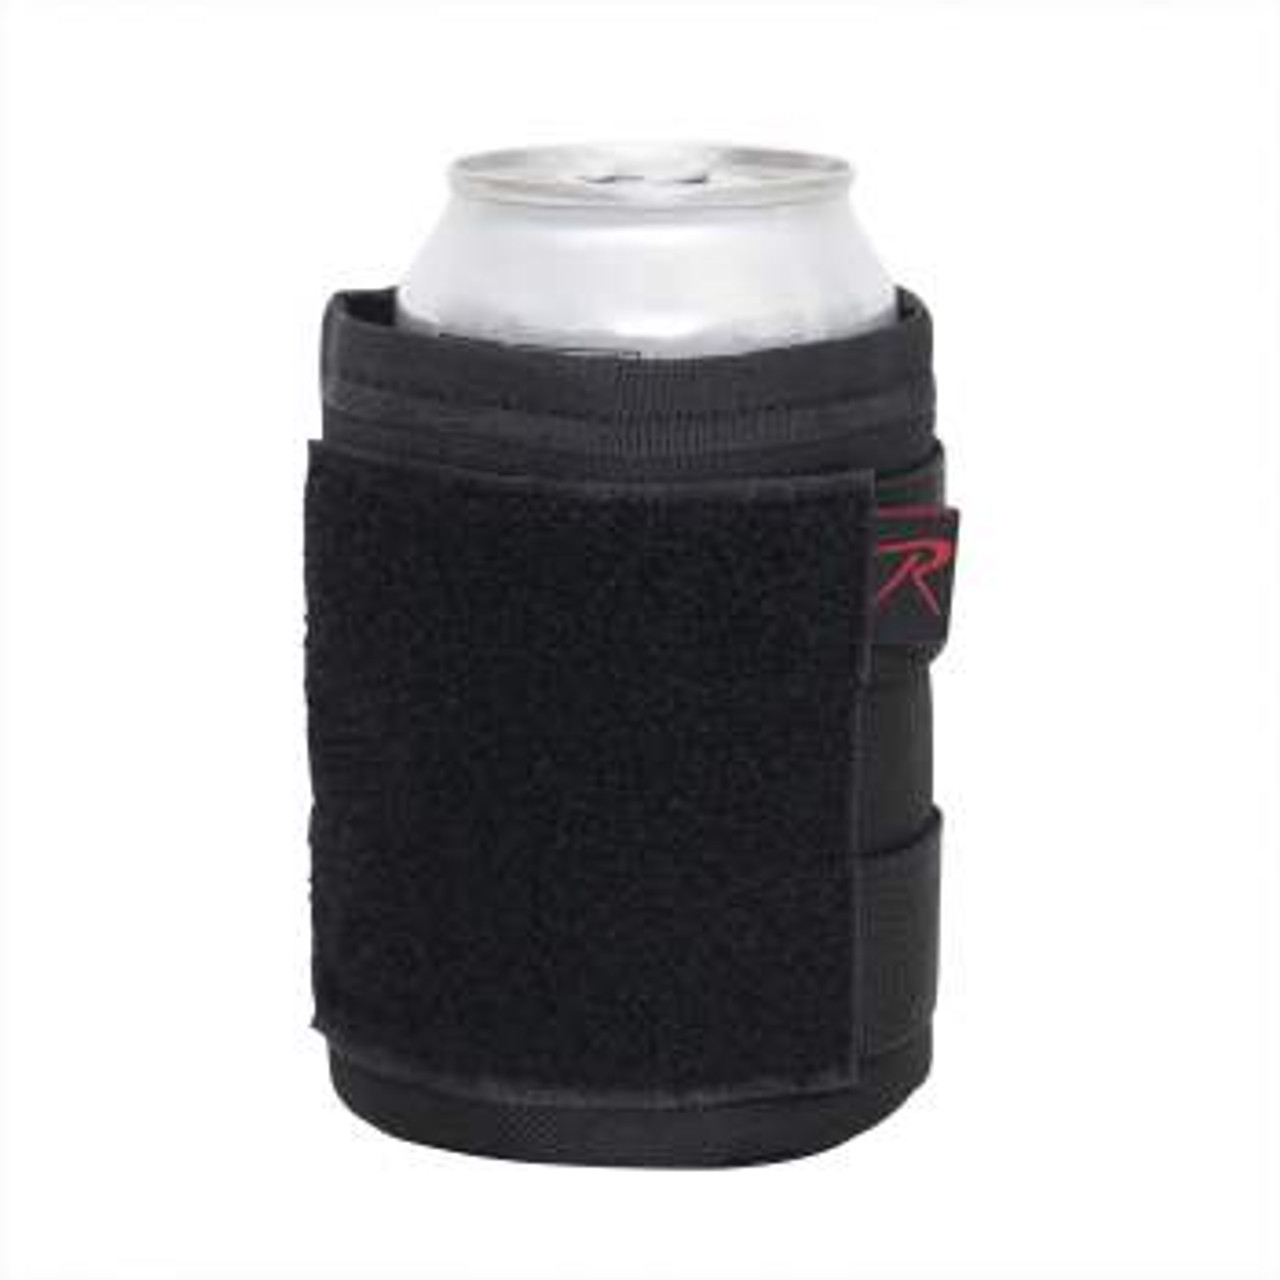 Rothco Tactical Insulated Beverage Holder, Black